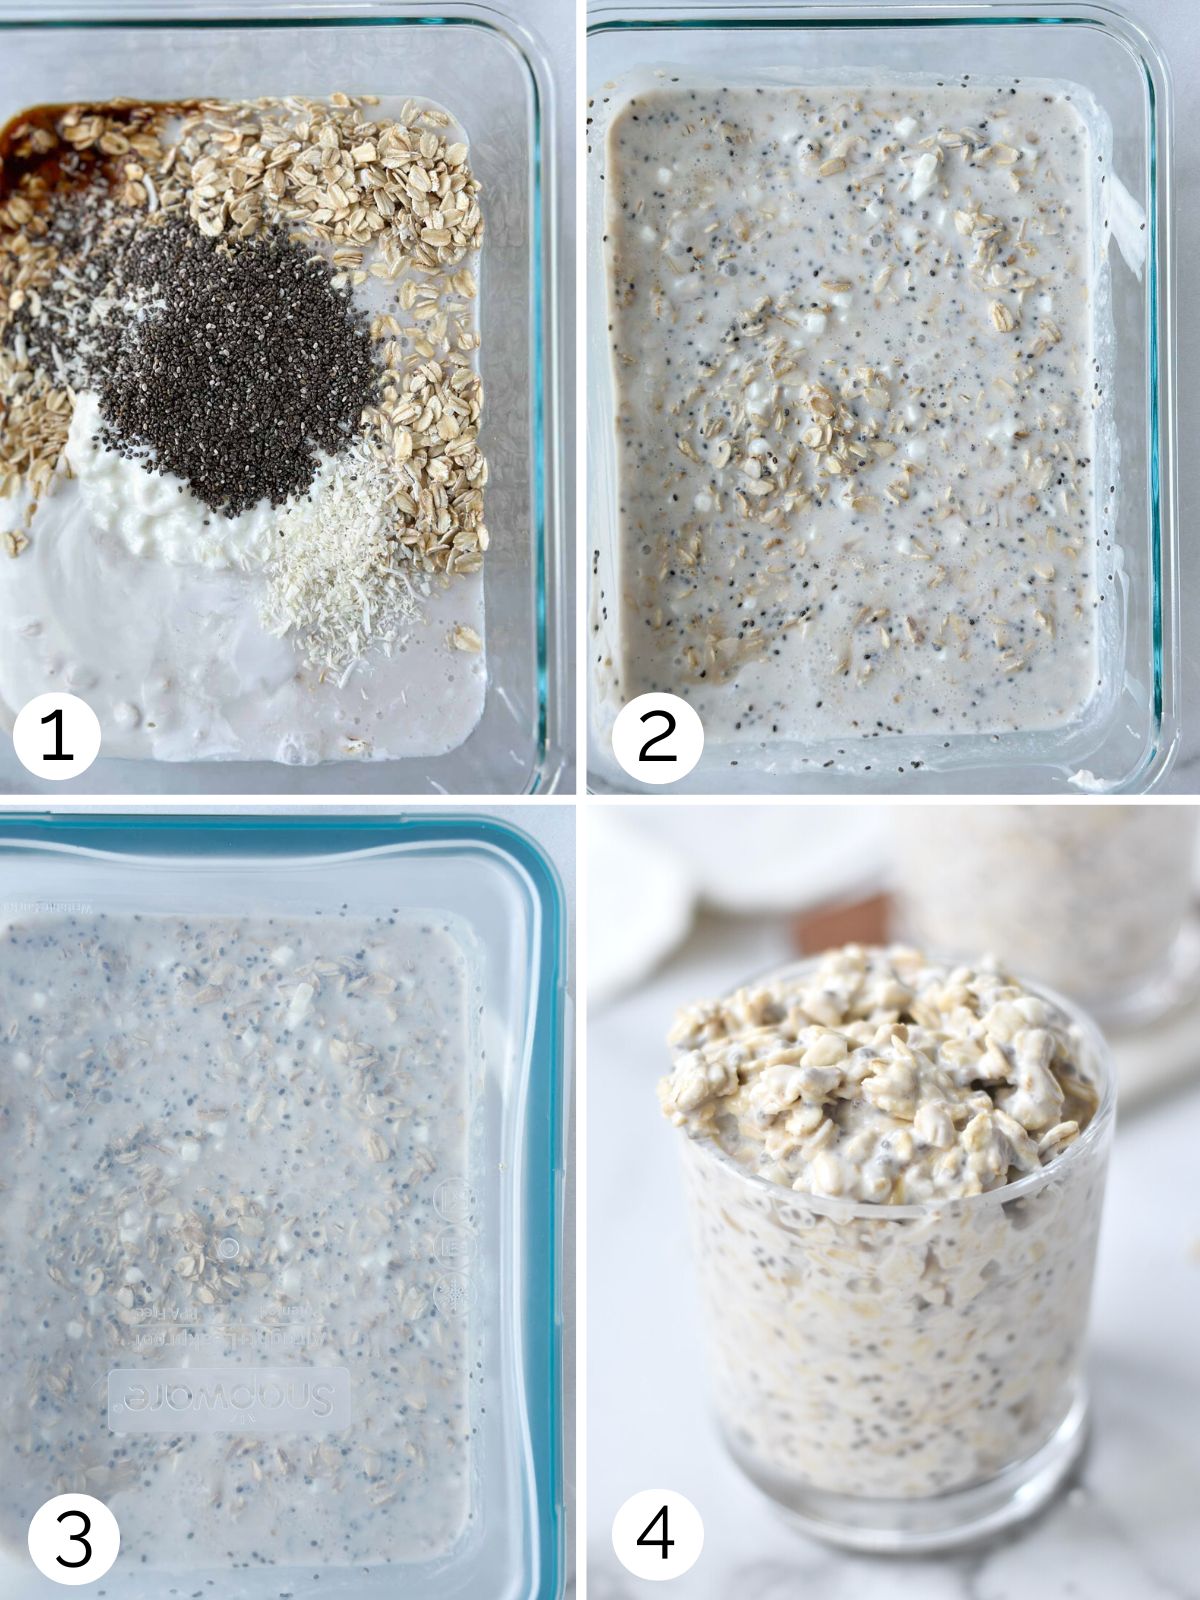 Adding ingredients for overnight oats to a glass bowl and mixing.